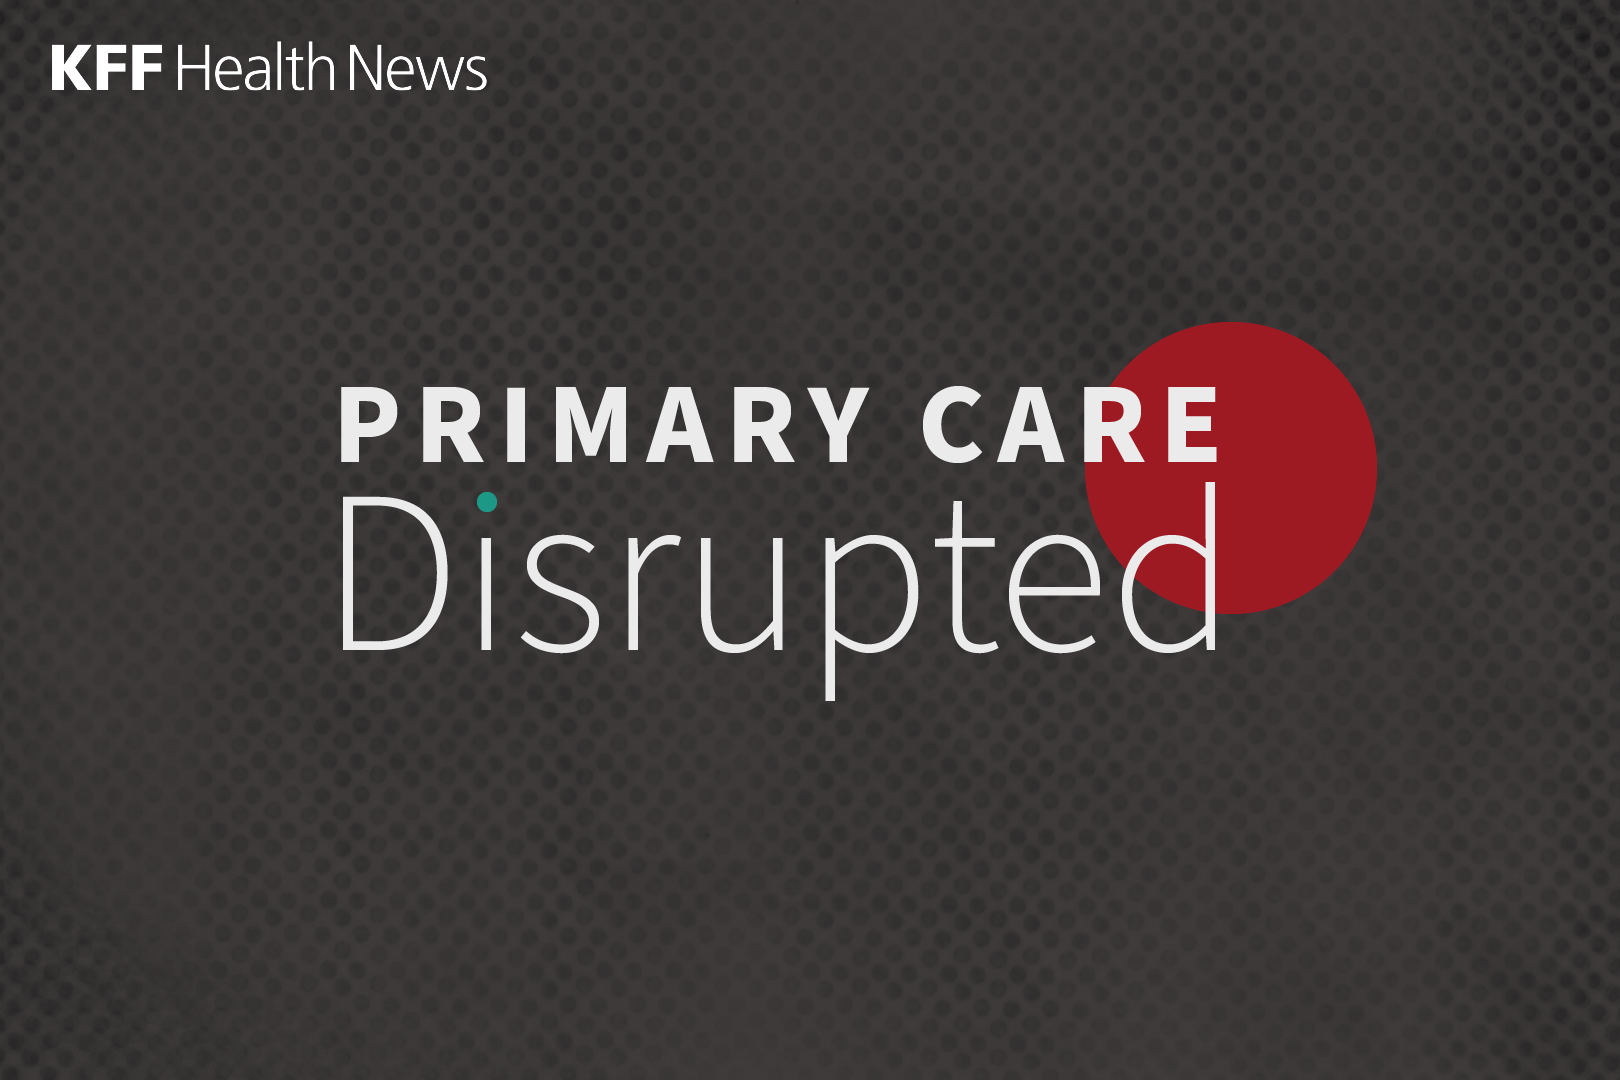 Disrupting Primary Care: An Overview in Video Format